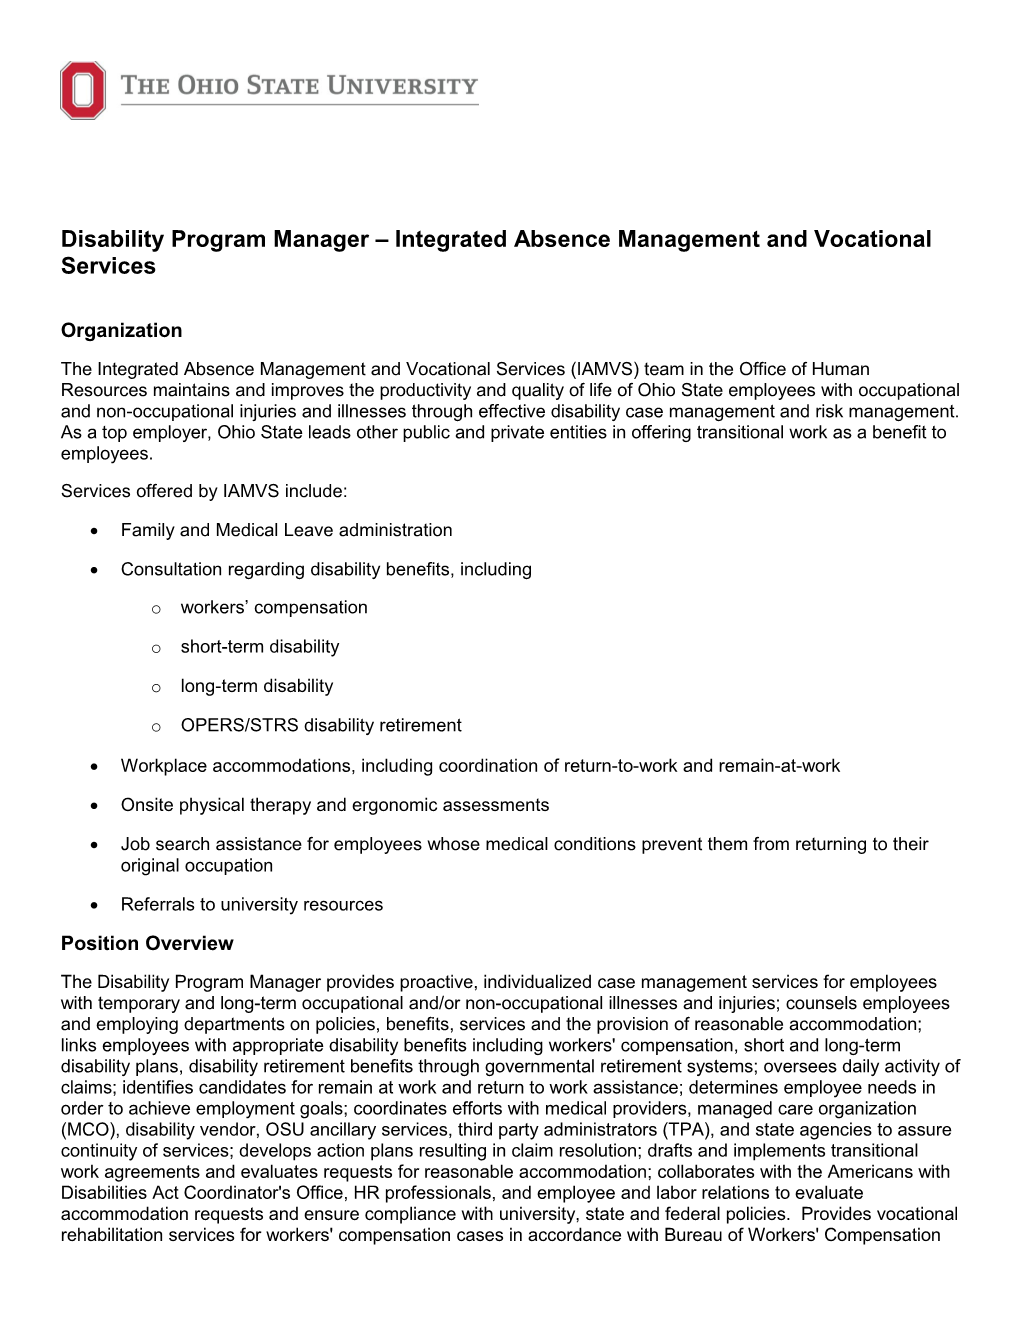 Disability Program Manager Integrated Absence Management and Vocational Services